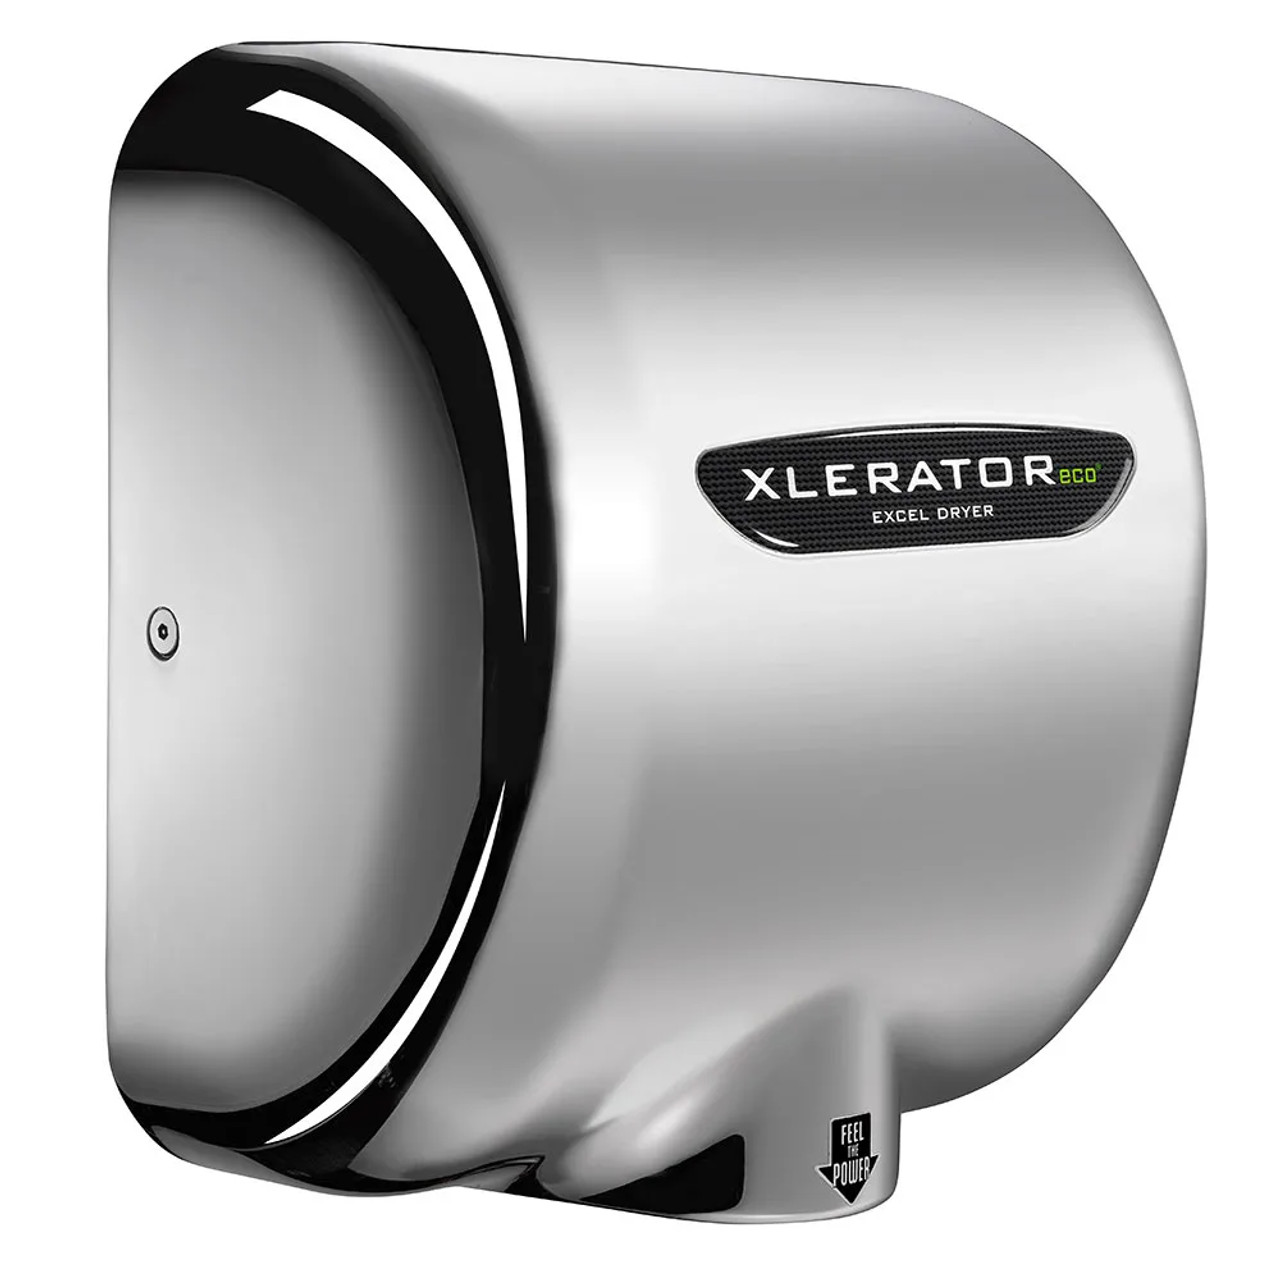 Excel Dryer Automatic Hand Dryer - 10 Second Dry Time, 110-120V - Chicken Pieces